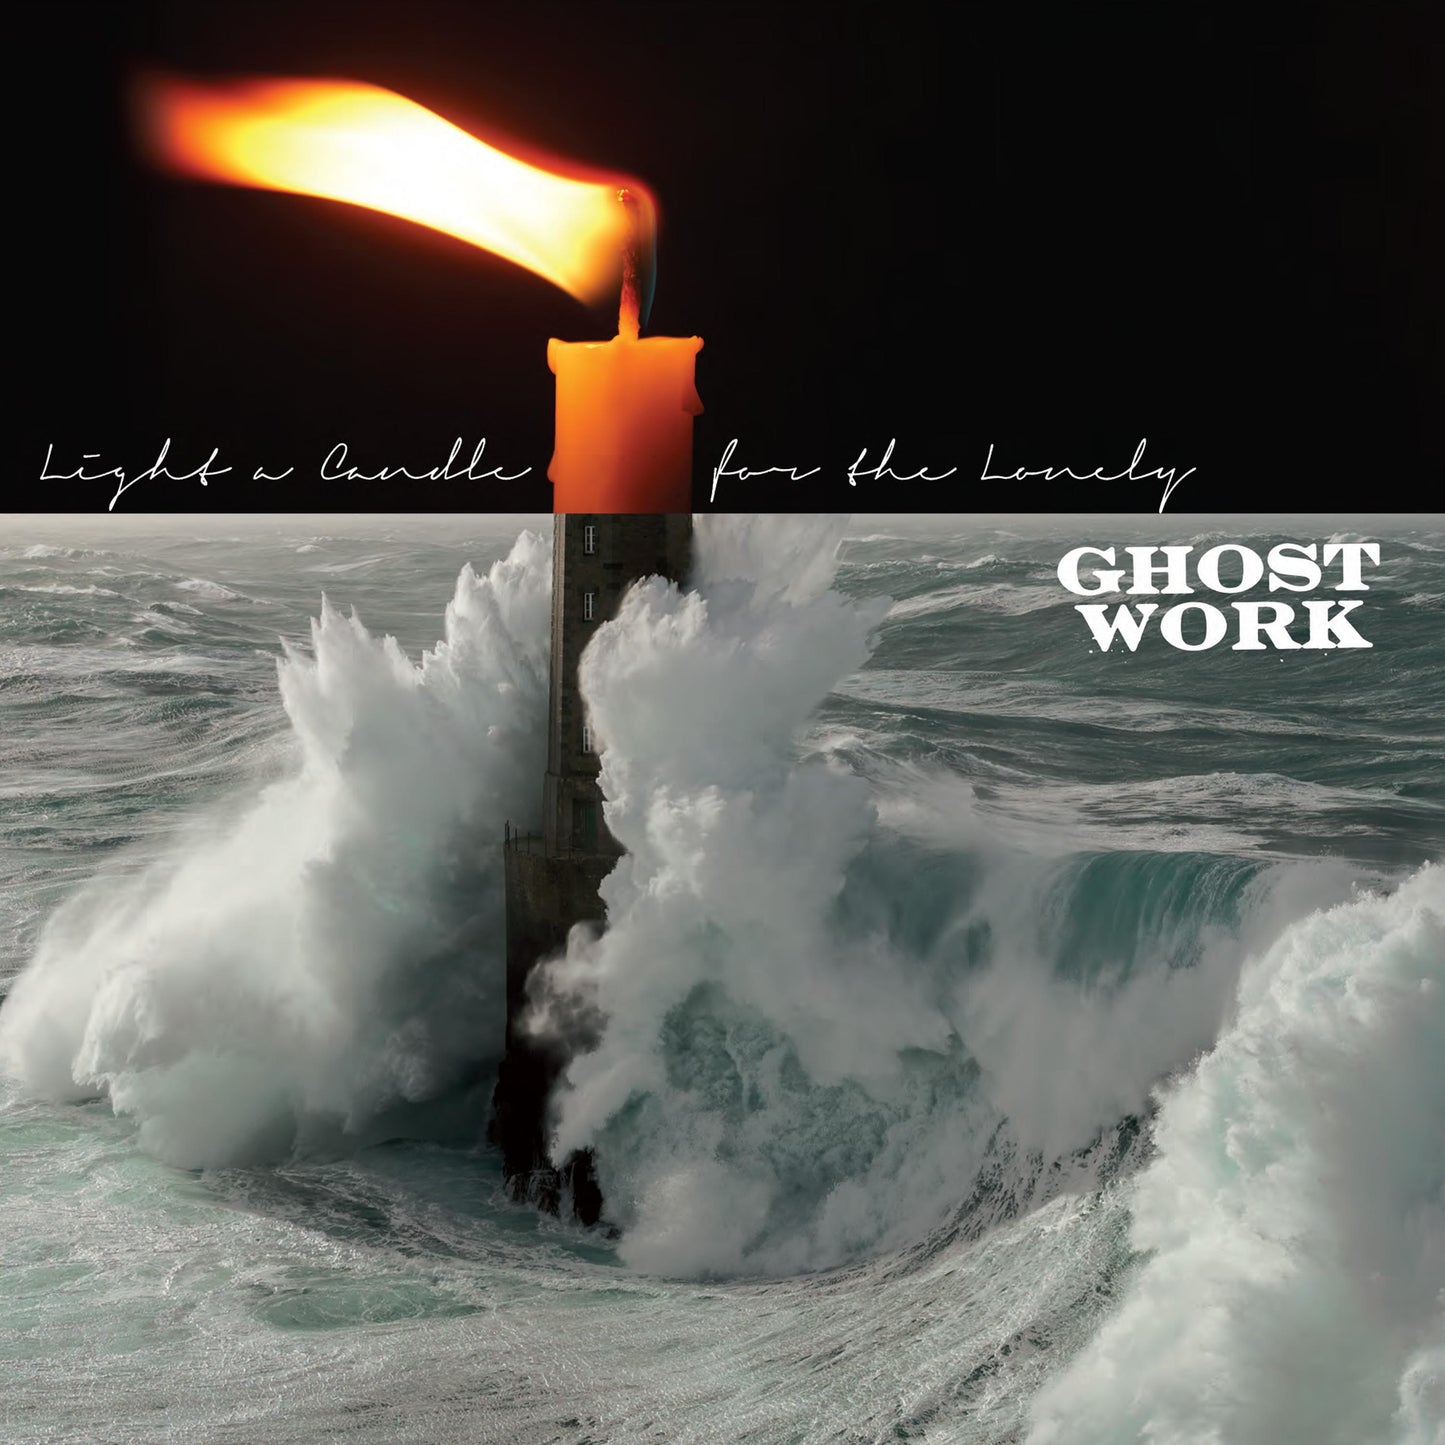 Ghost Work "Light A Candle For The Lonely" LP